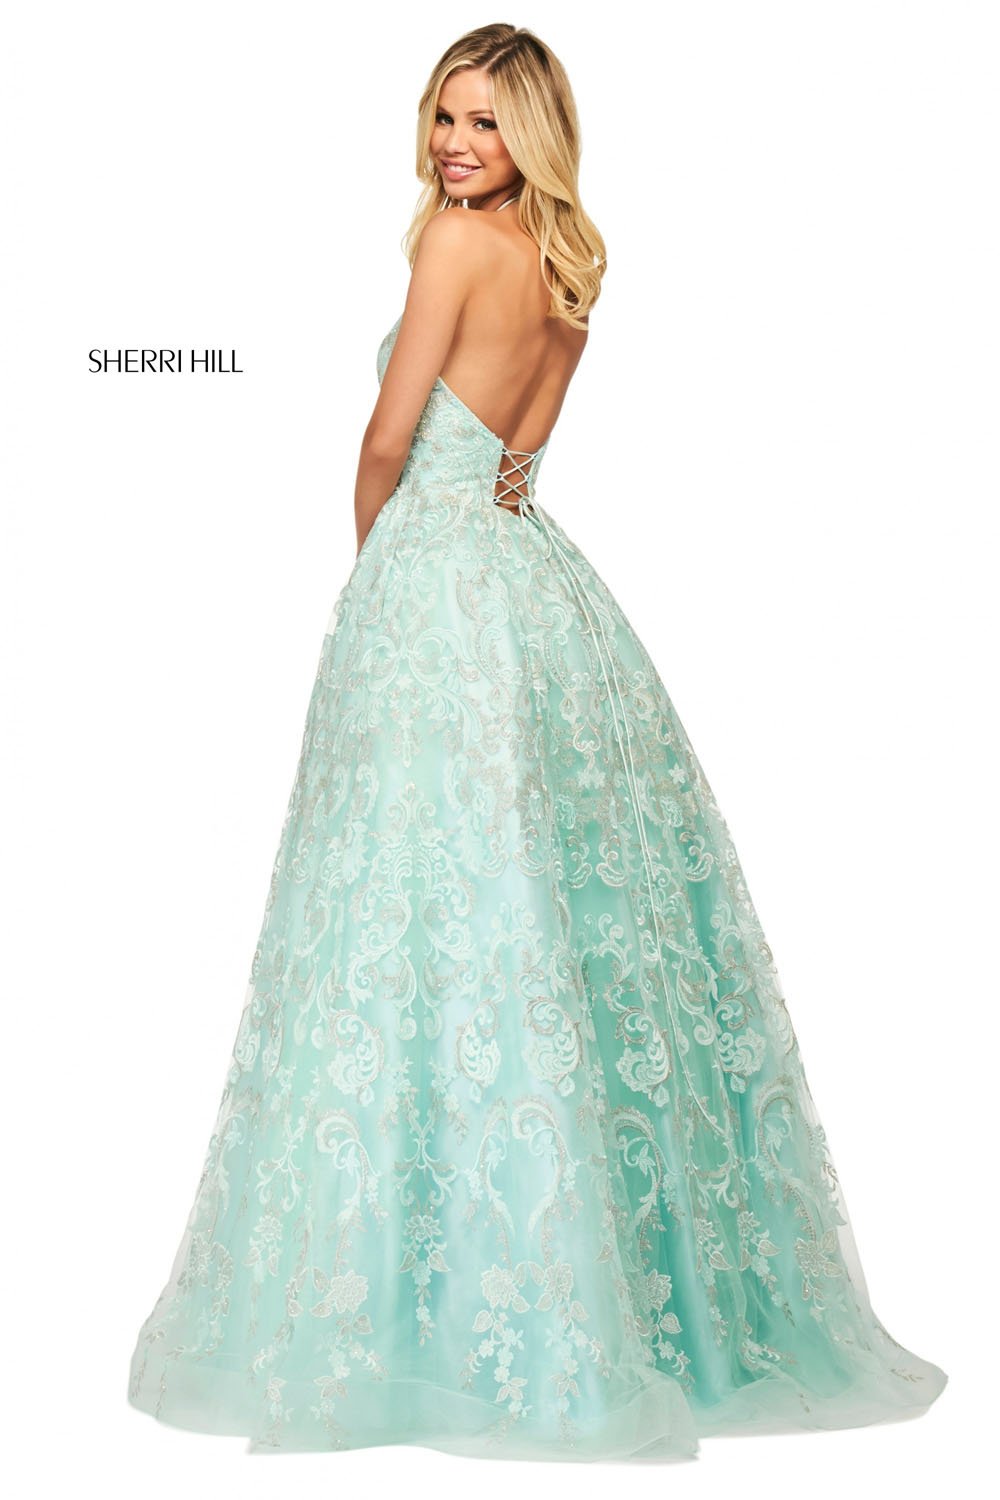 Sherri Hill 53688 dress images in these colors: Ivory, Periwinkle, Seafoam, Pink, Lilac.